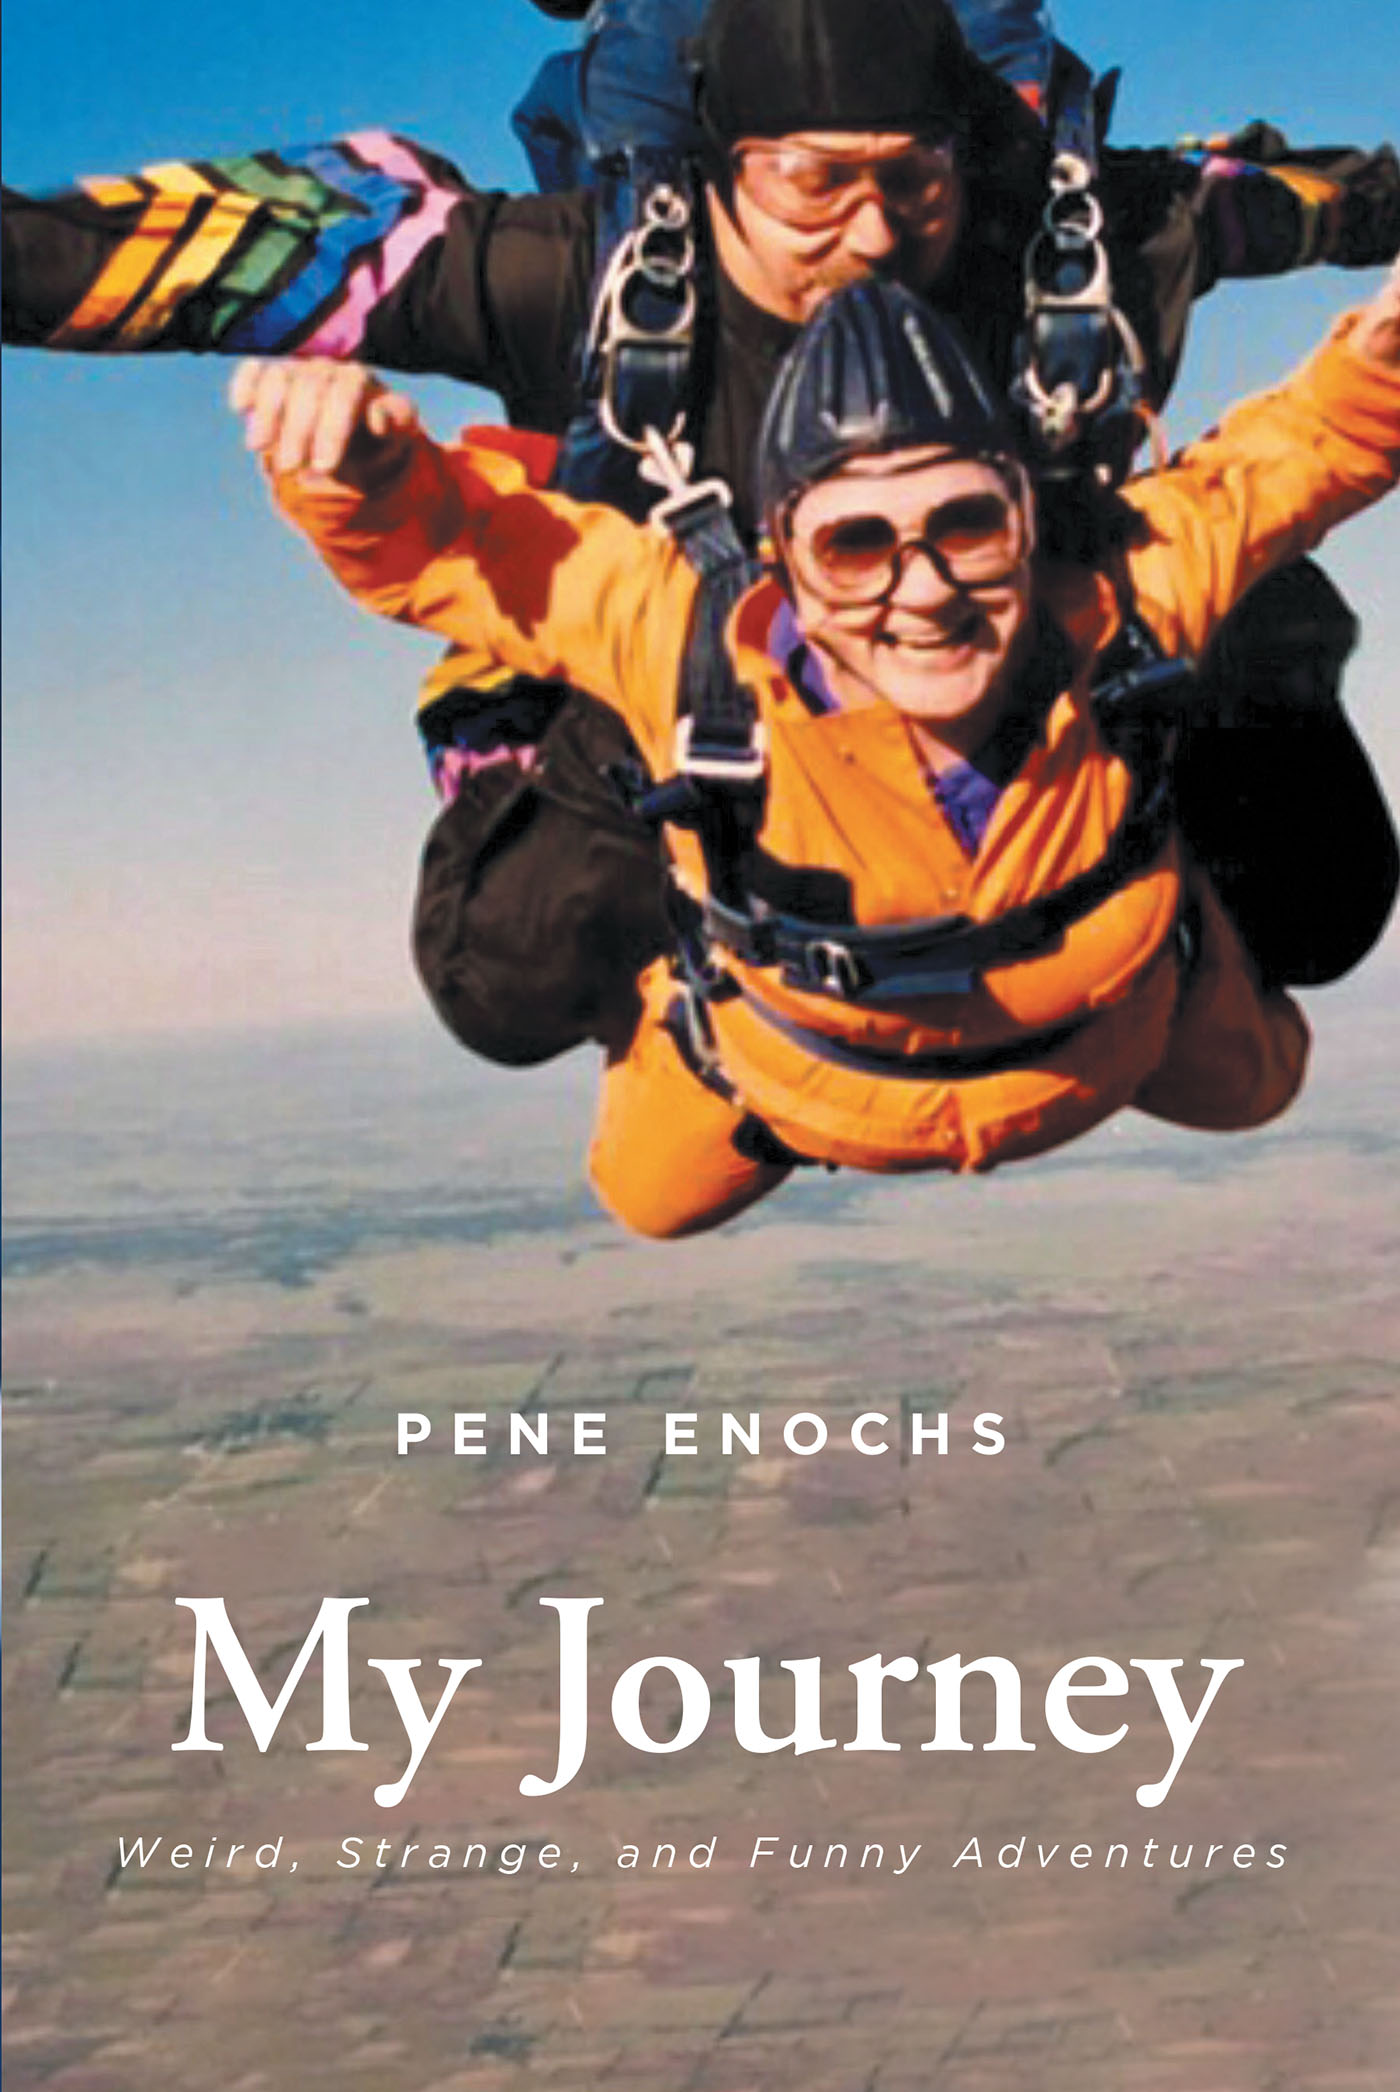 Pene Enochs’s New Book, "My Journey: Weird, Strange, and Funny Adventures," is a Series of Stories That Reveal the Incredible Experiences That Shaped the Author's Life